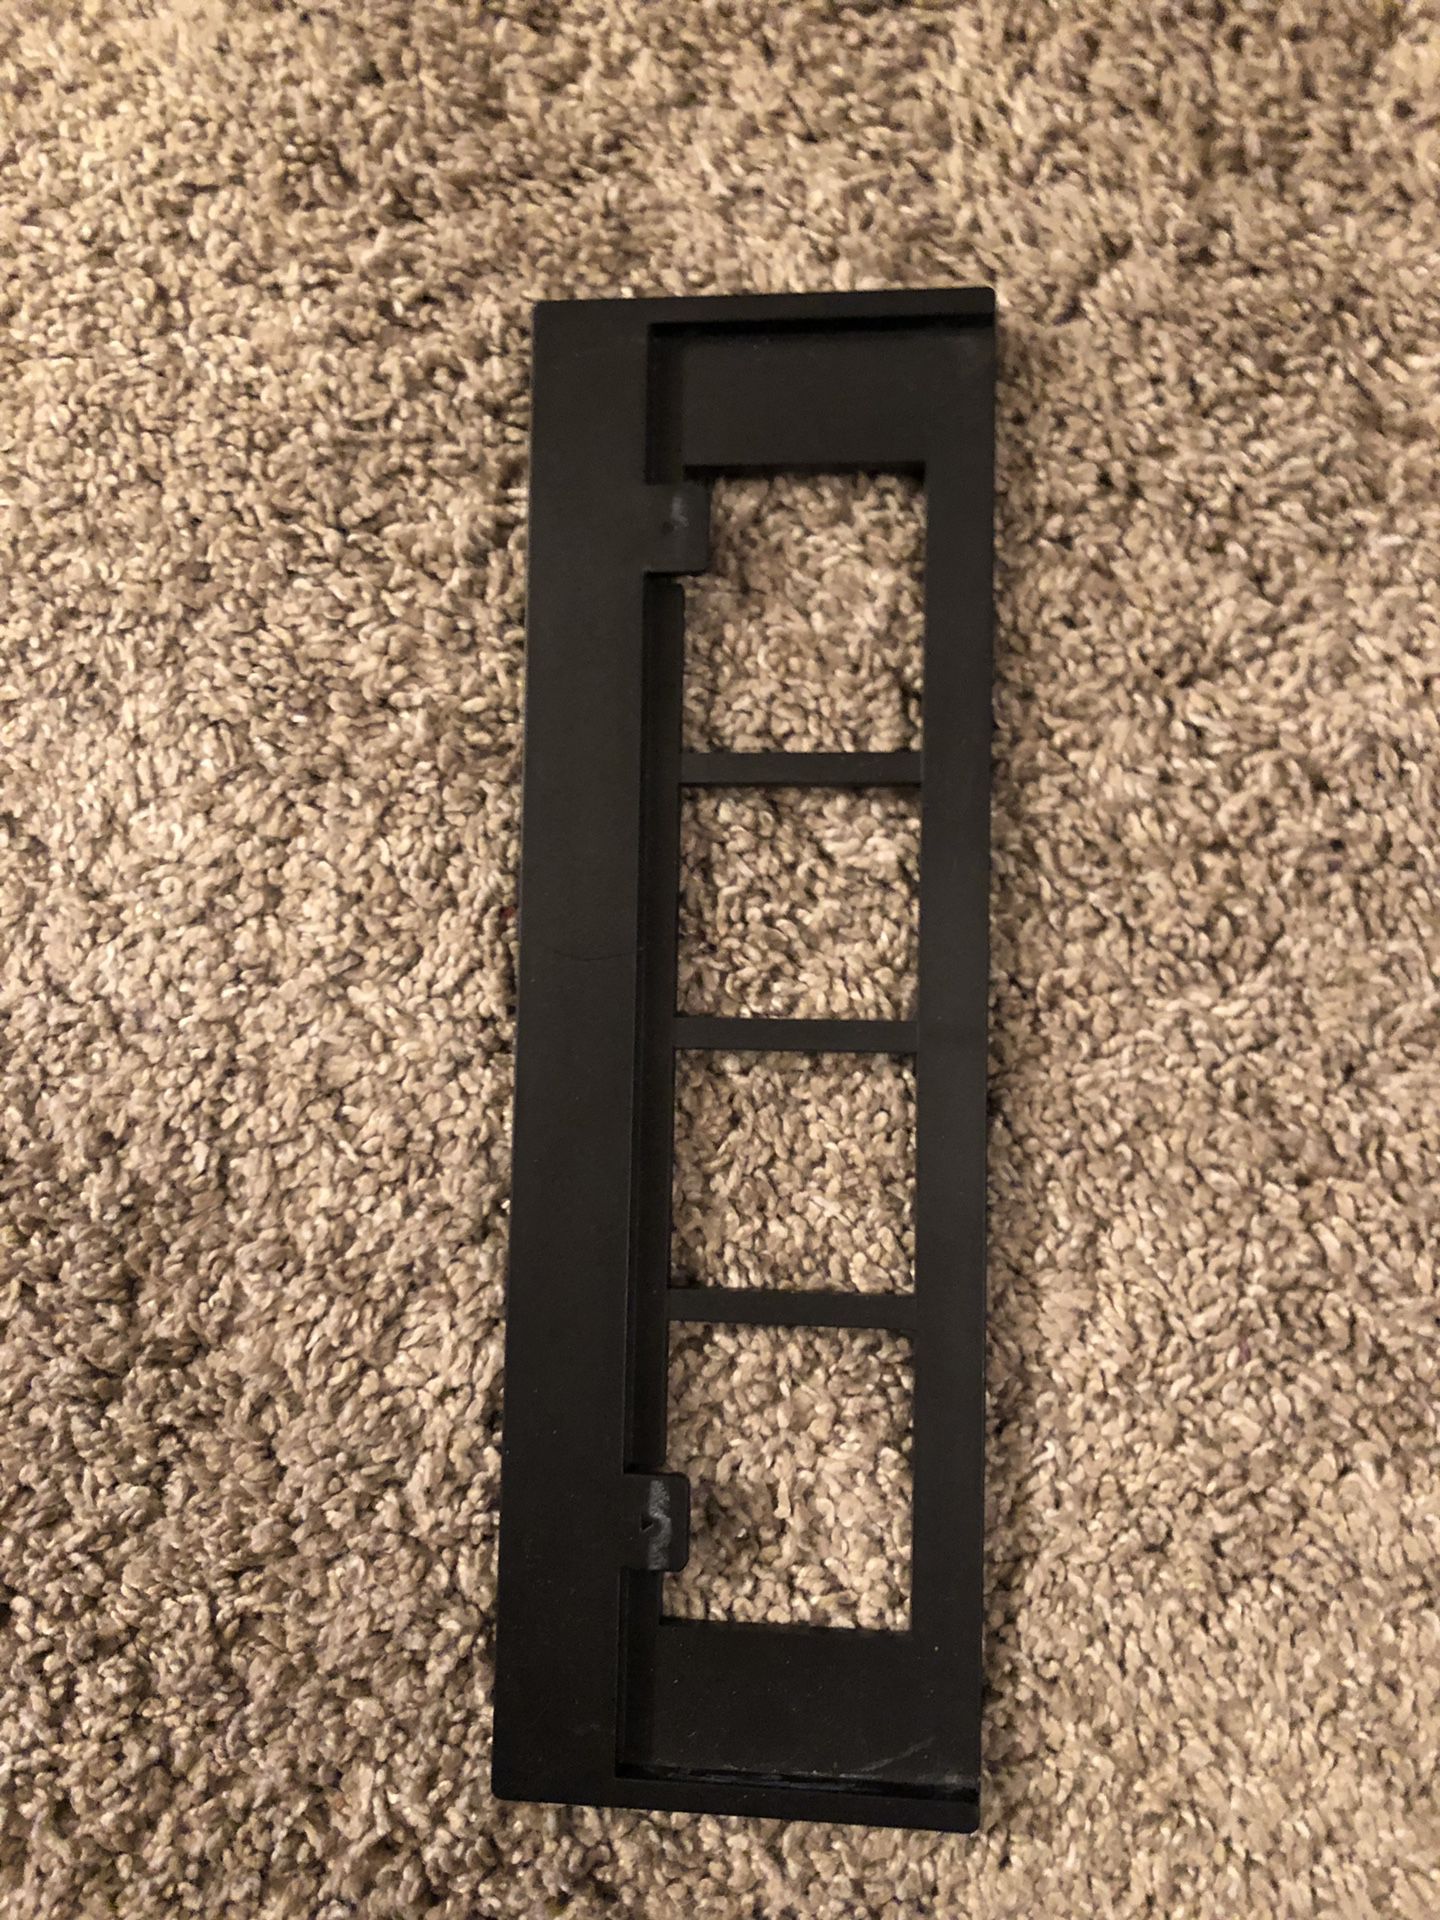 Xbox One s vertical stand